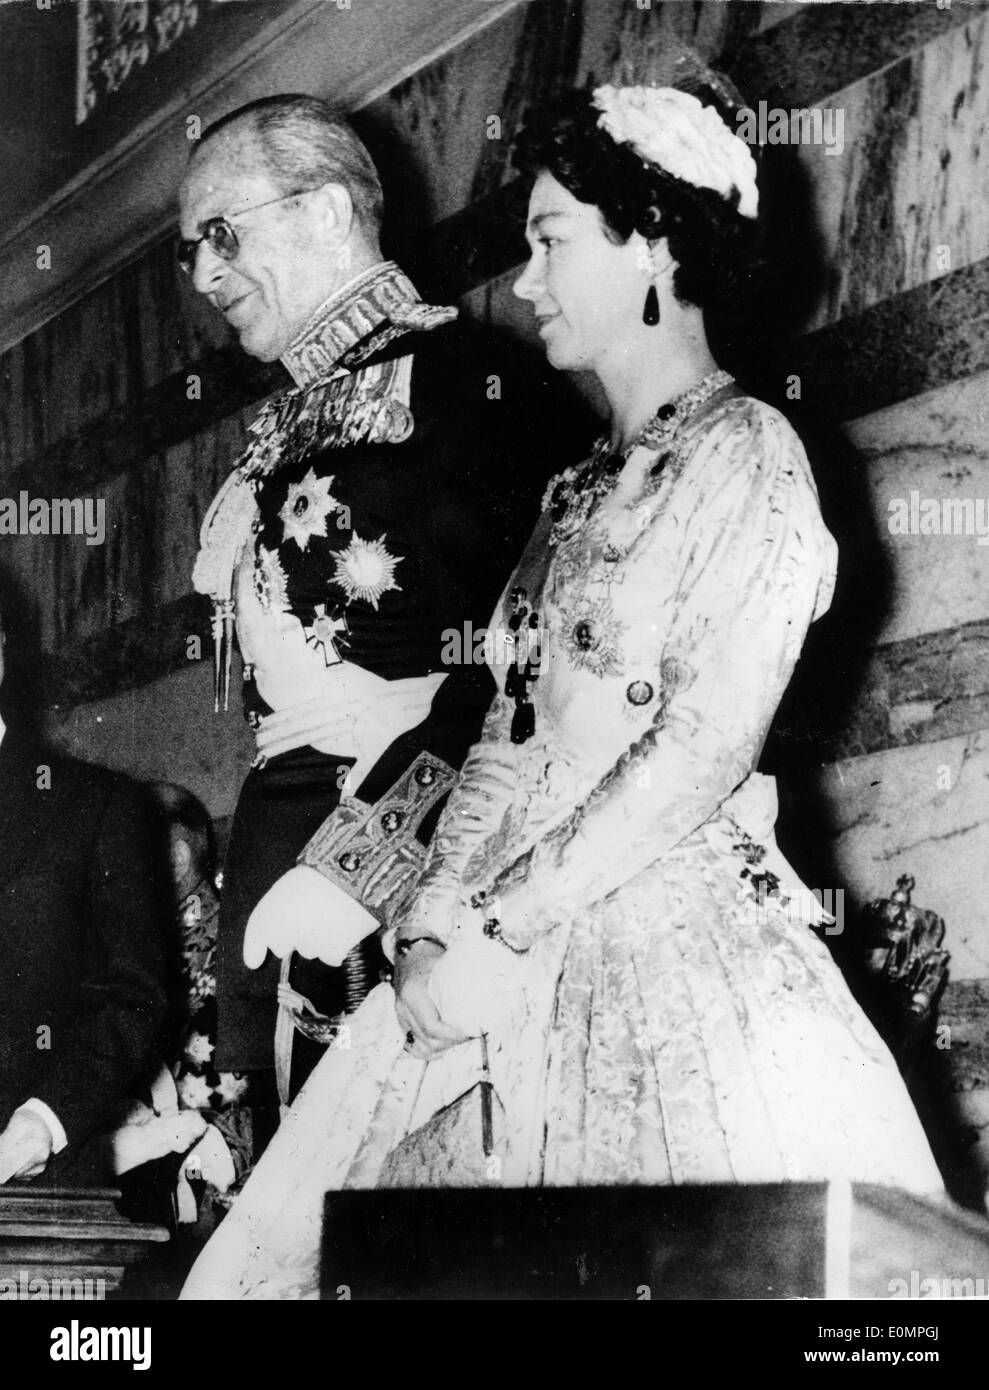 King Paul and wife Queen Frederica during a ceremony Stock Photo